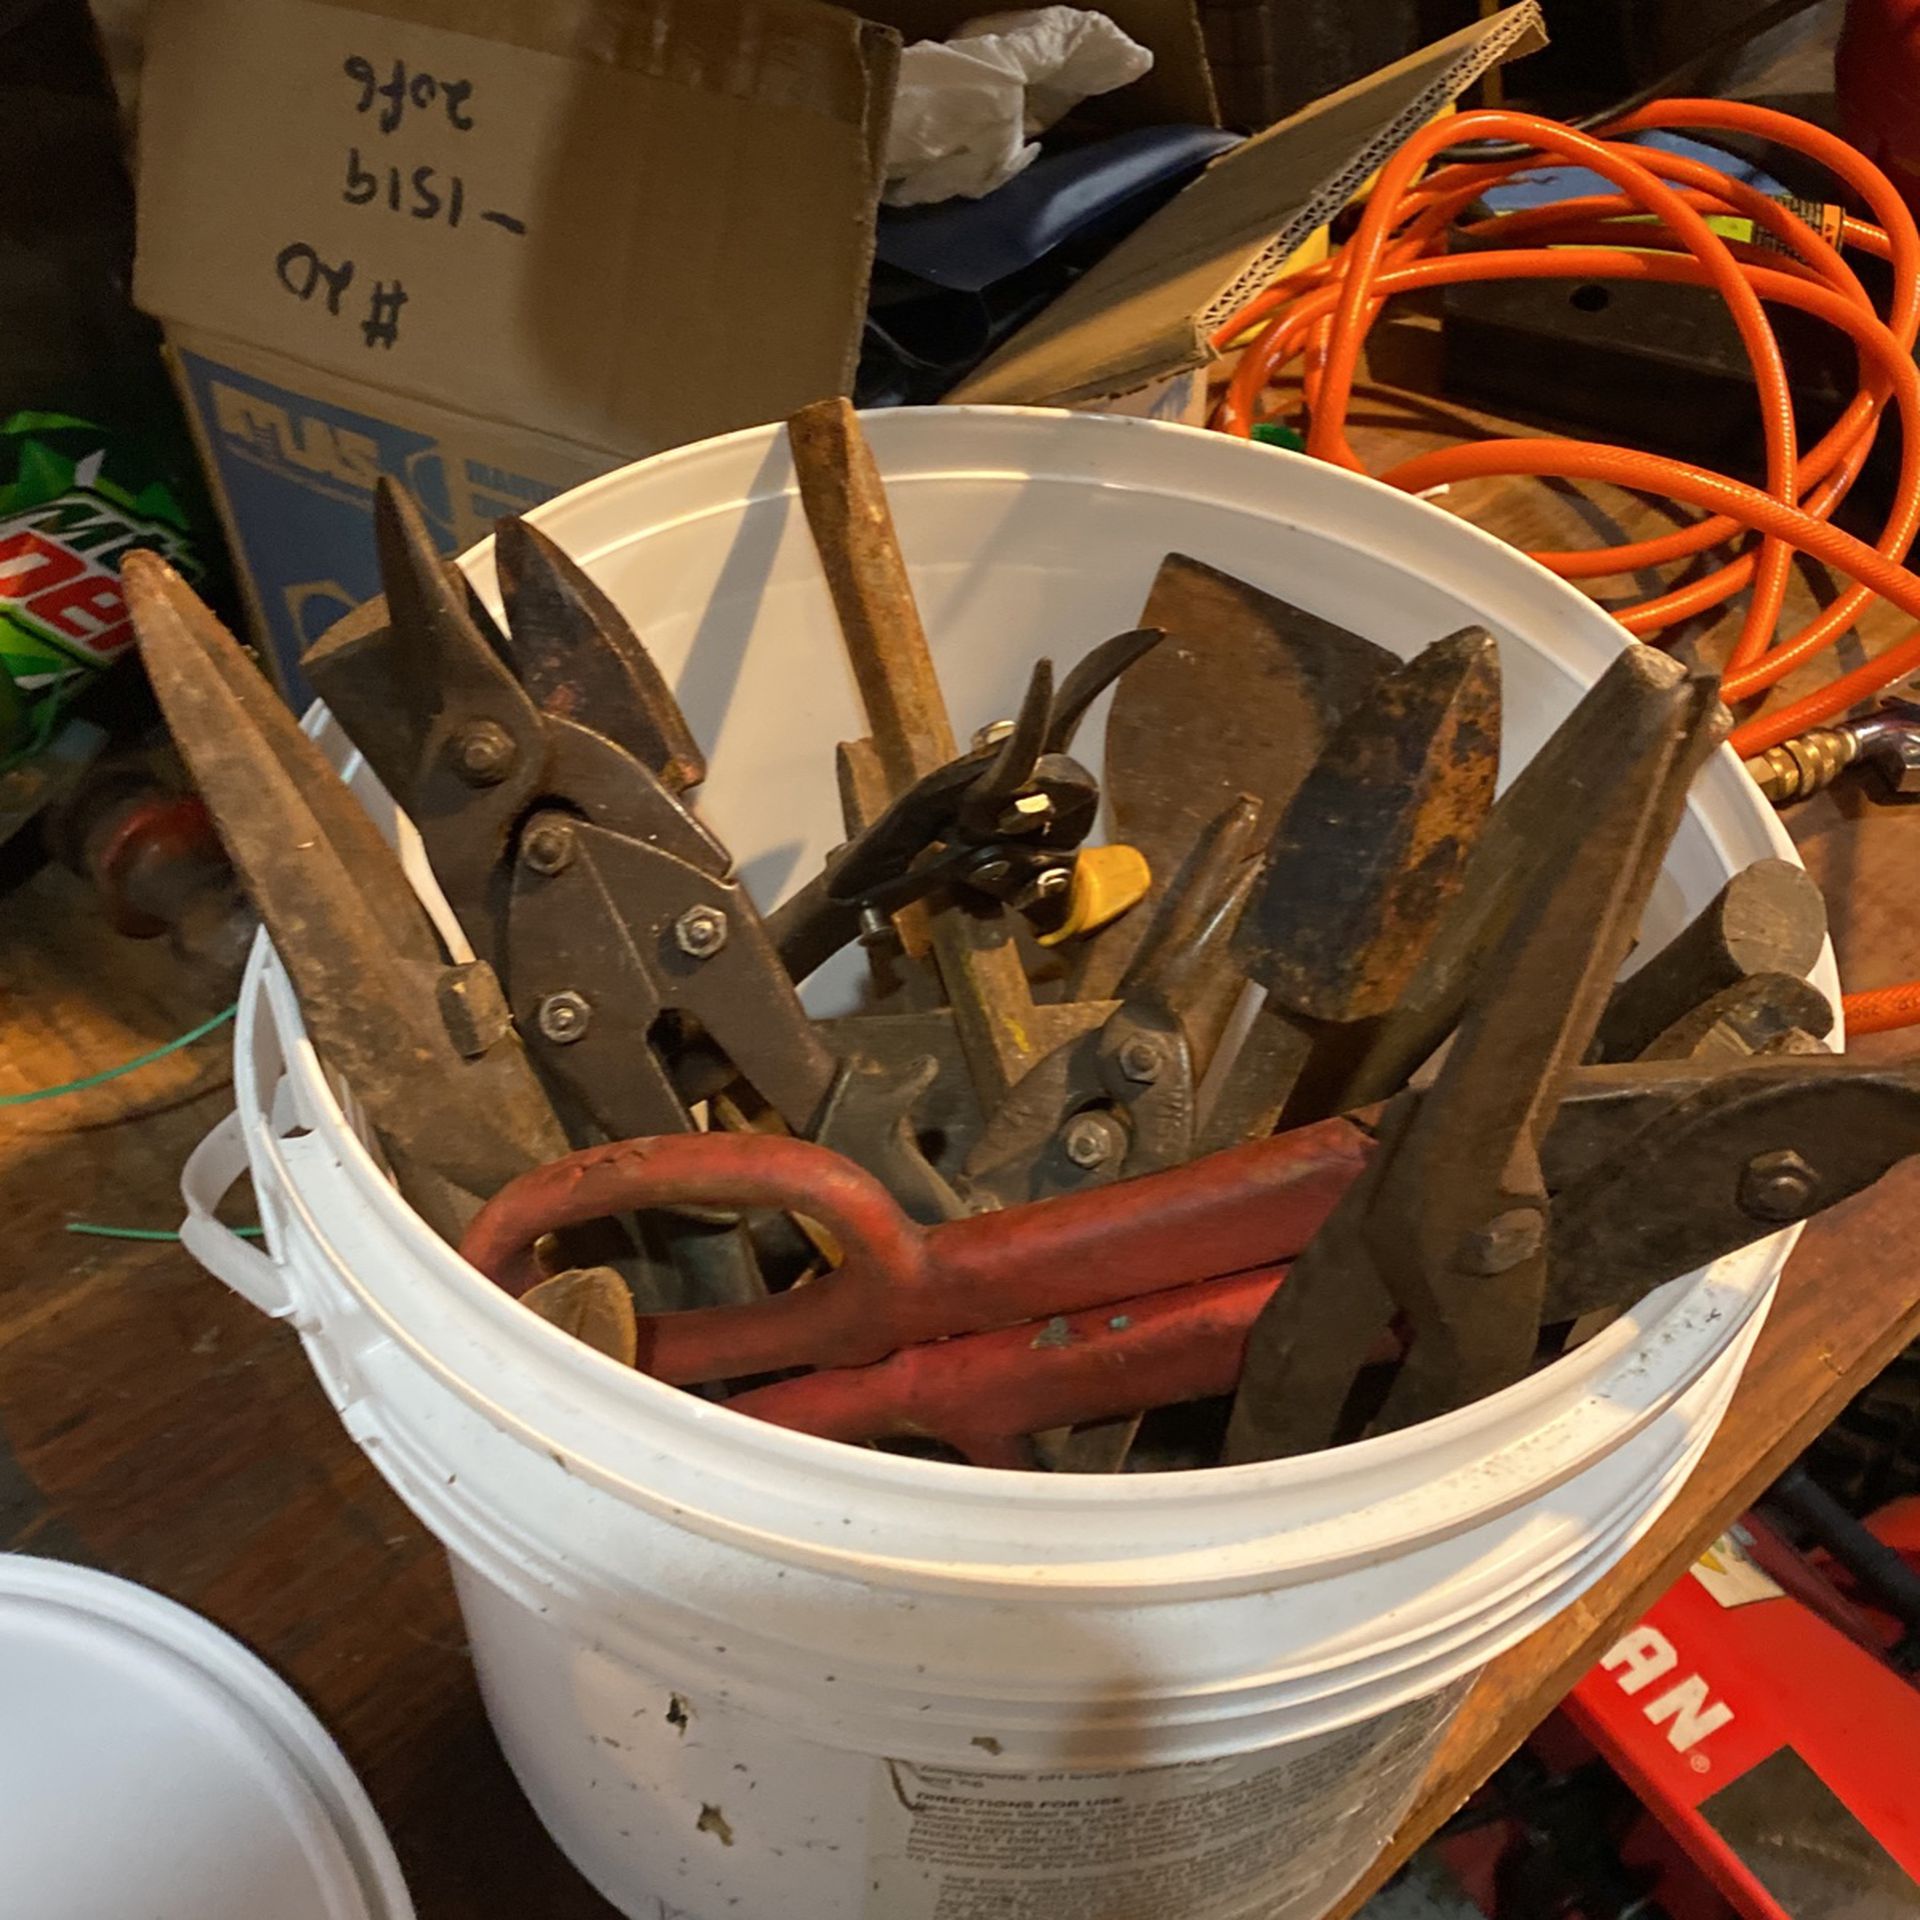 A bucket of old Tools 